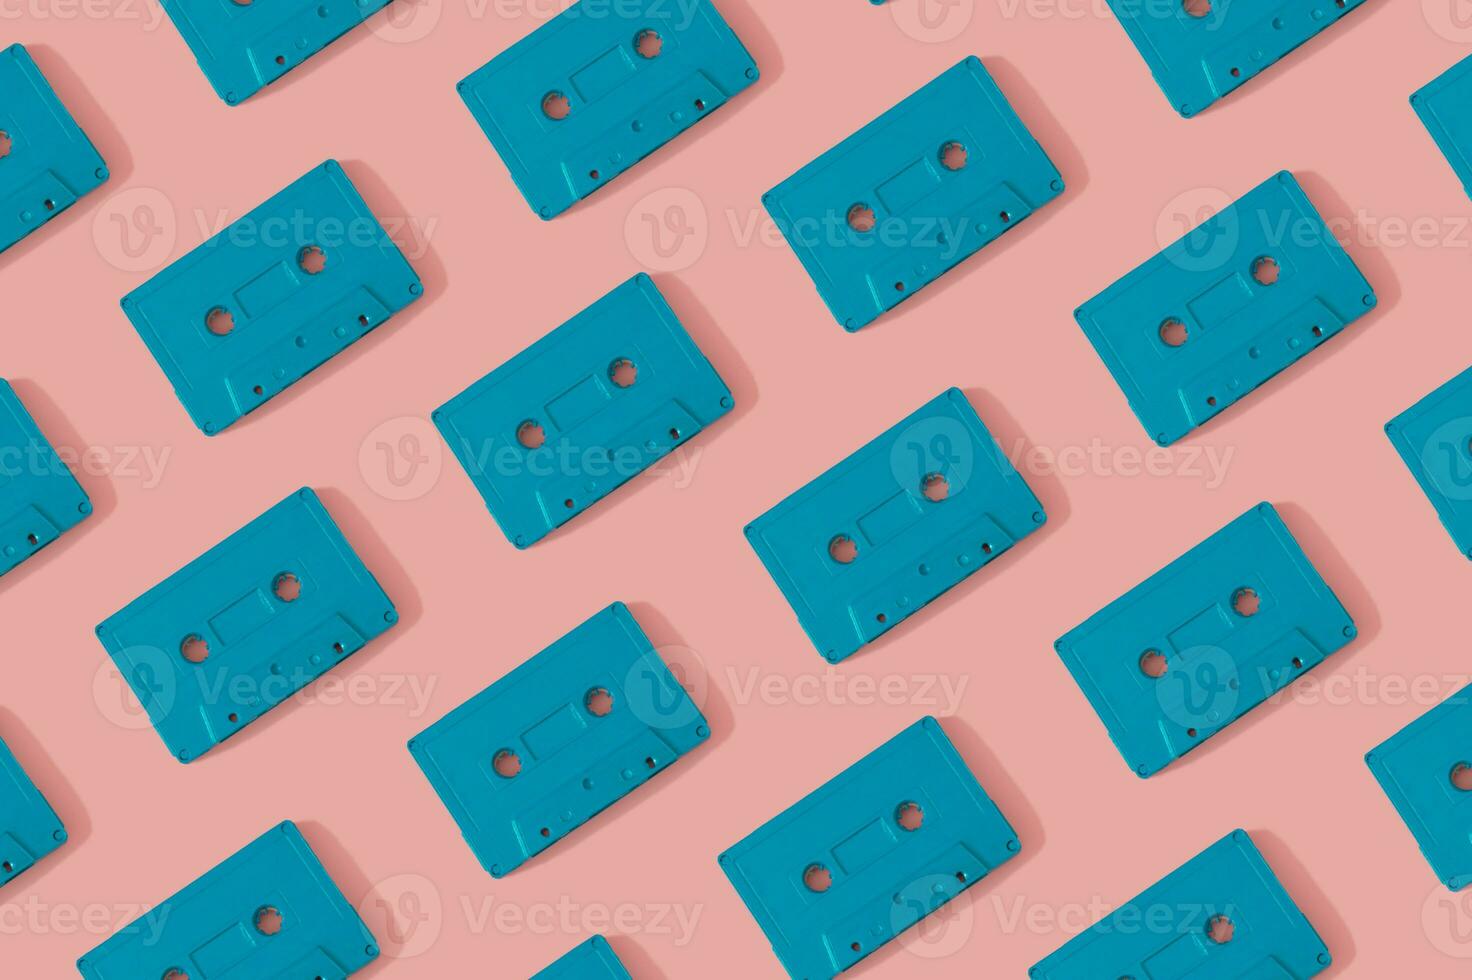 Pattern made with retro blue audio cassette tapes on modern pink background. Creative concept of retro technology. 80's aesthetic. Retro vintage audio cassette tape pattern idea. Flat lay. photo